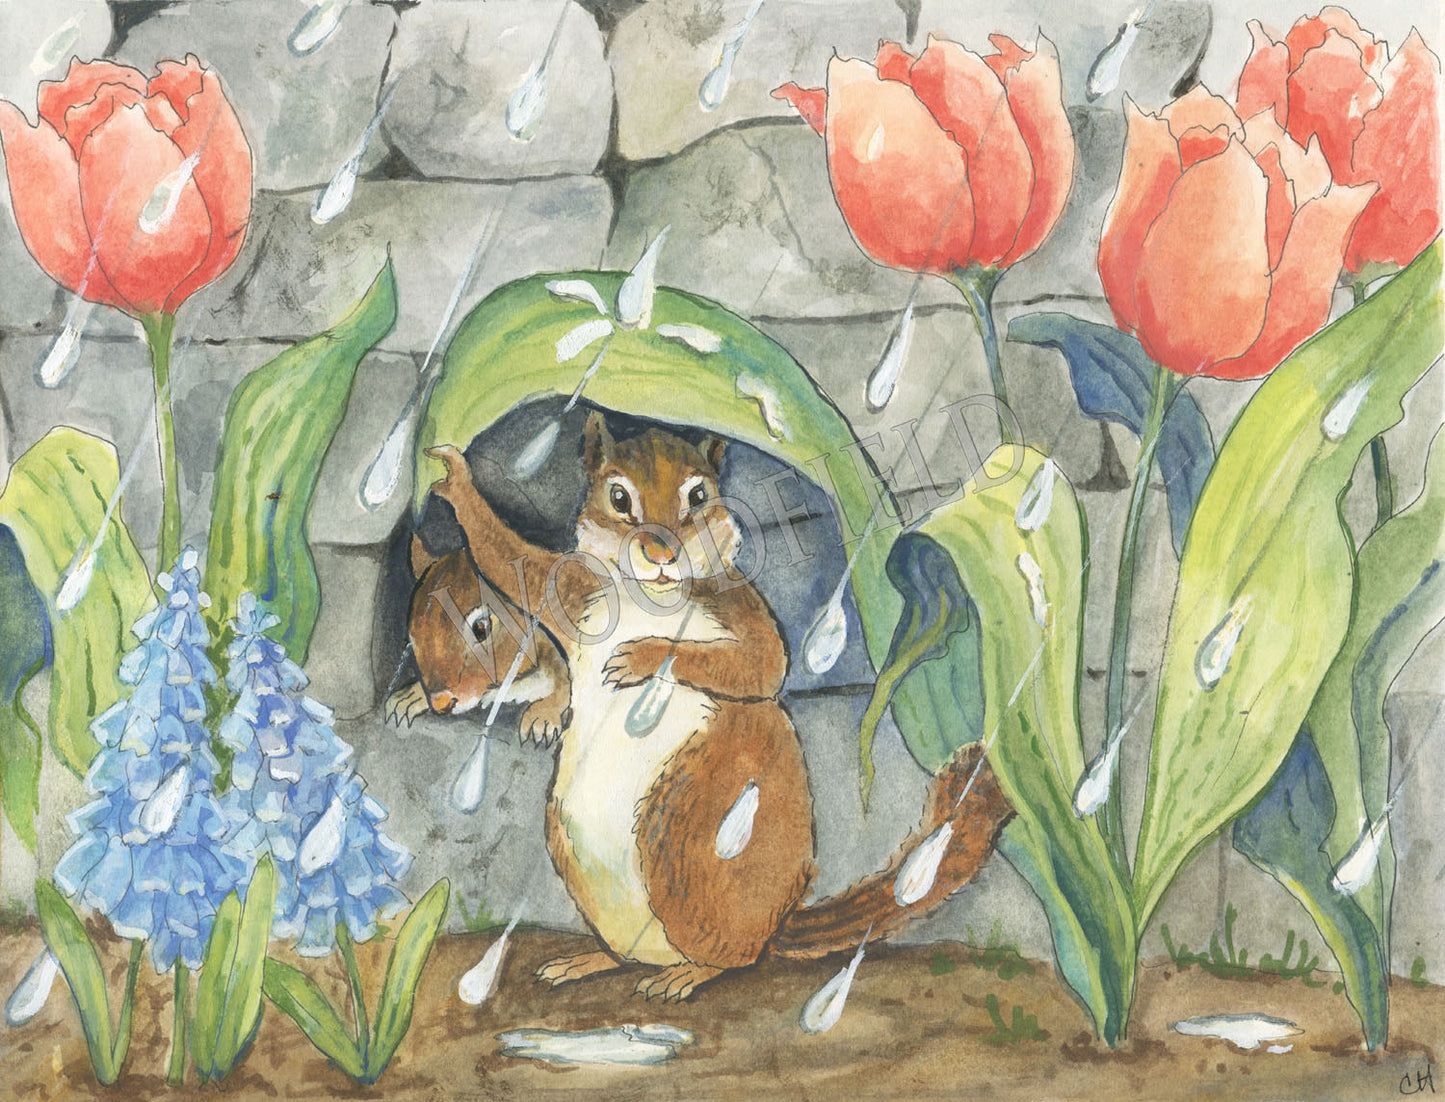 Spring Shower - Greeting Card by Woodfield Press